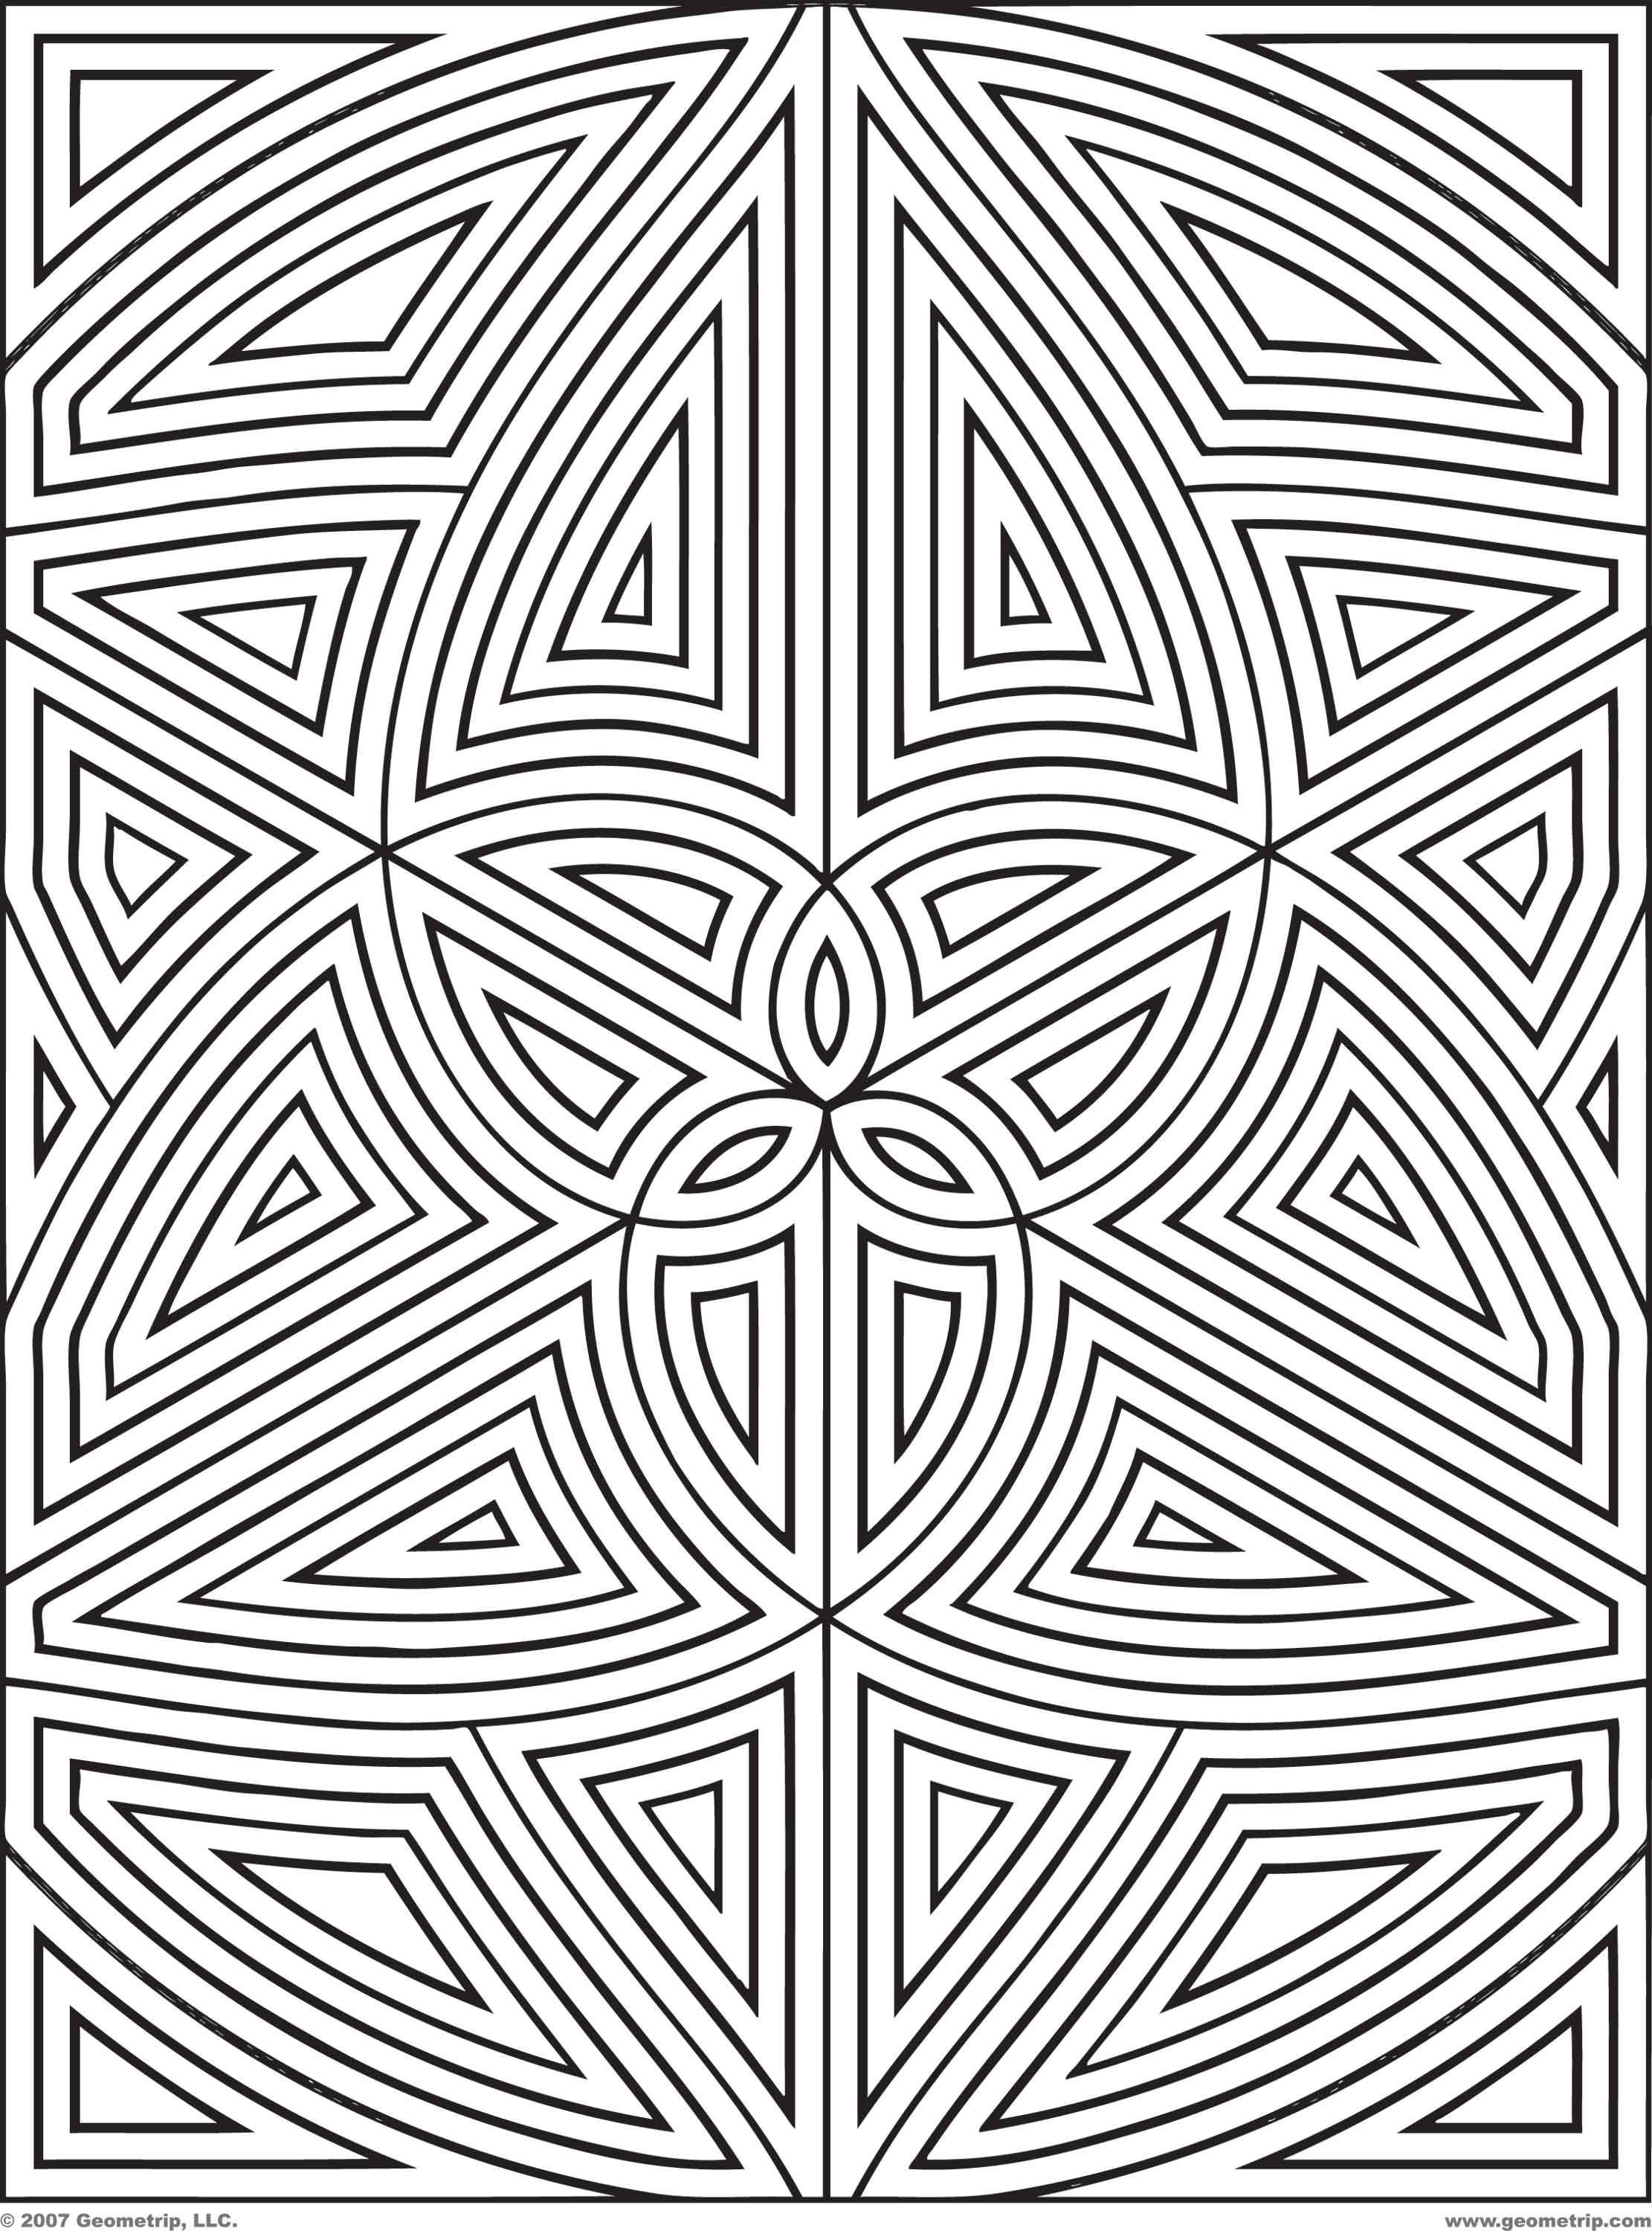 Print Coloring Pages Geometric Patterns Coloring Pages Images ...